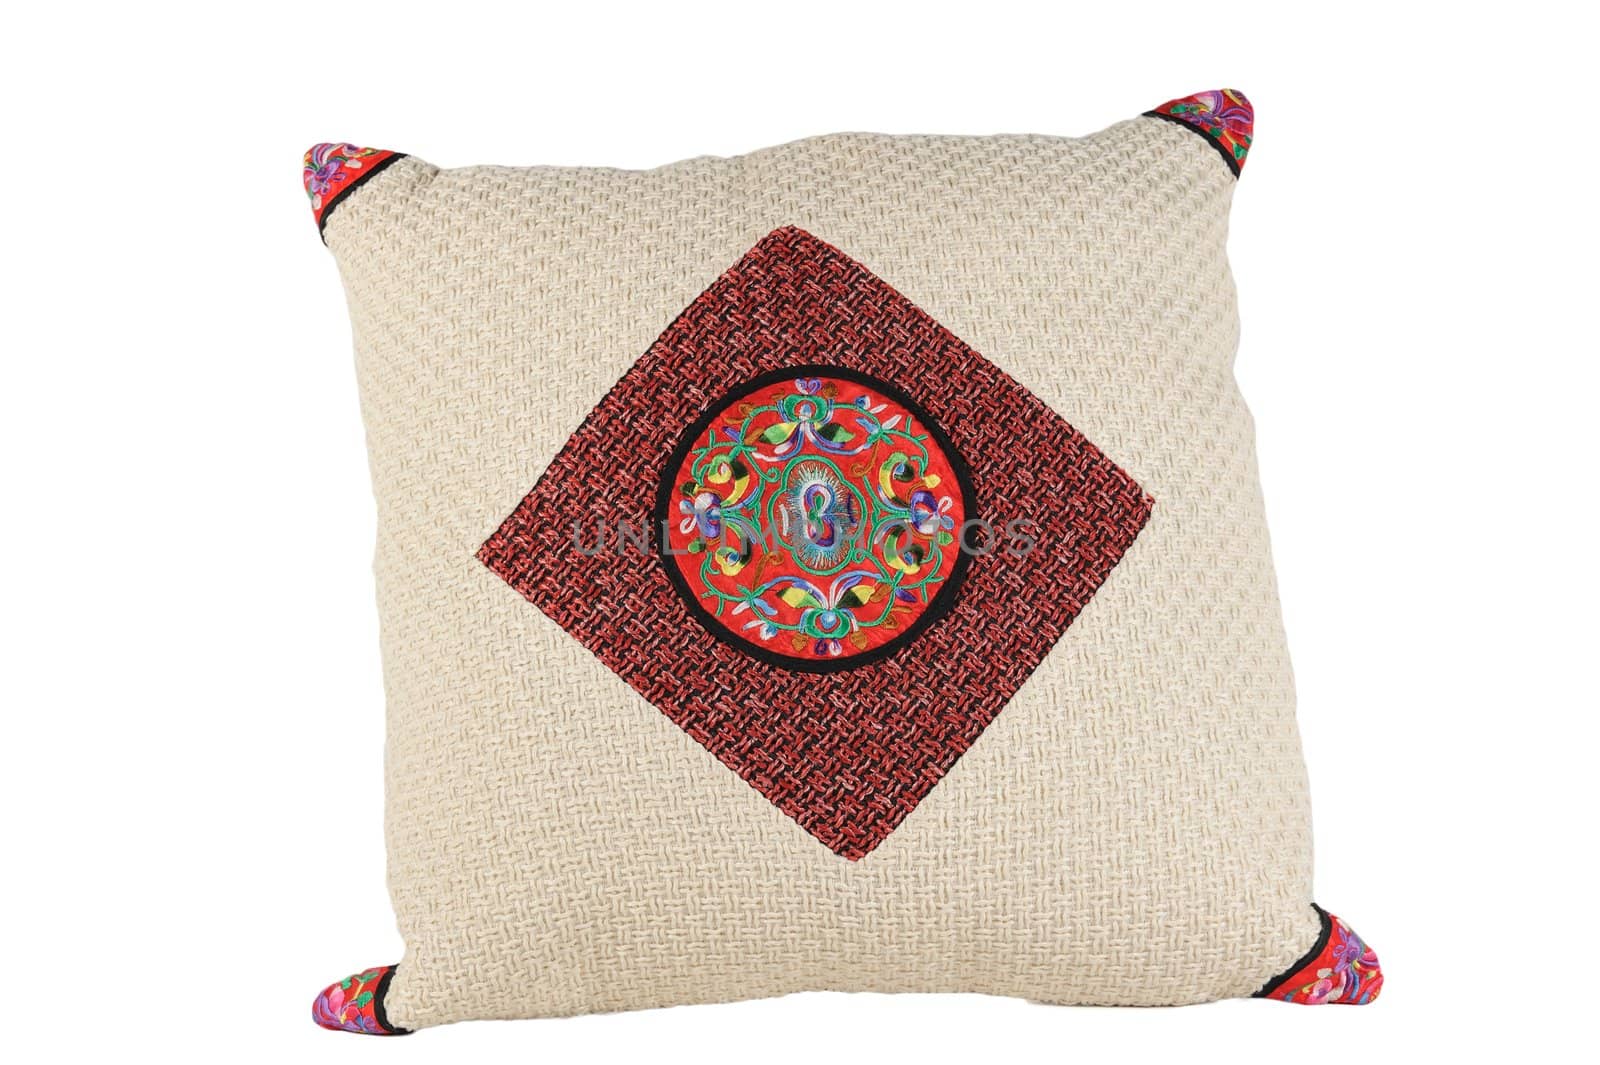 Chinese traditional style pillow by raywoo